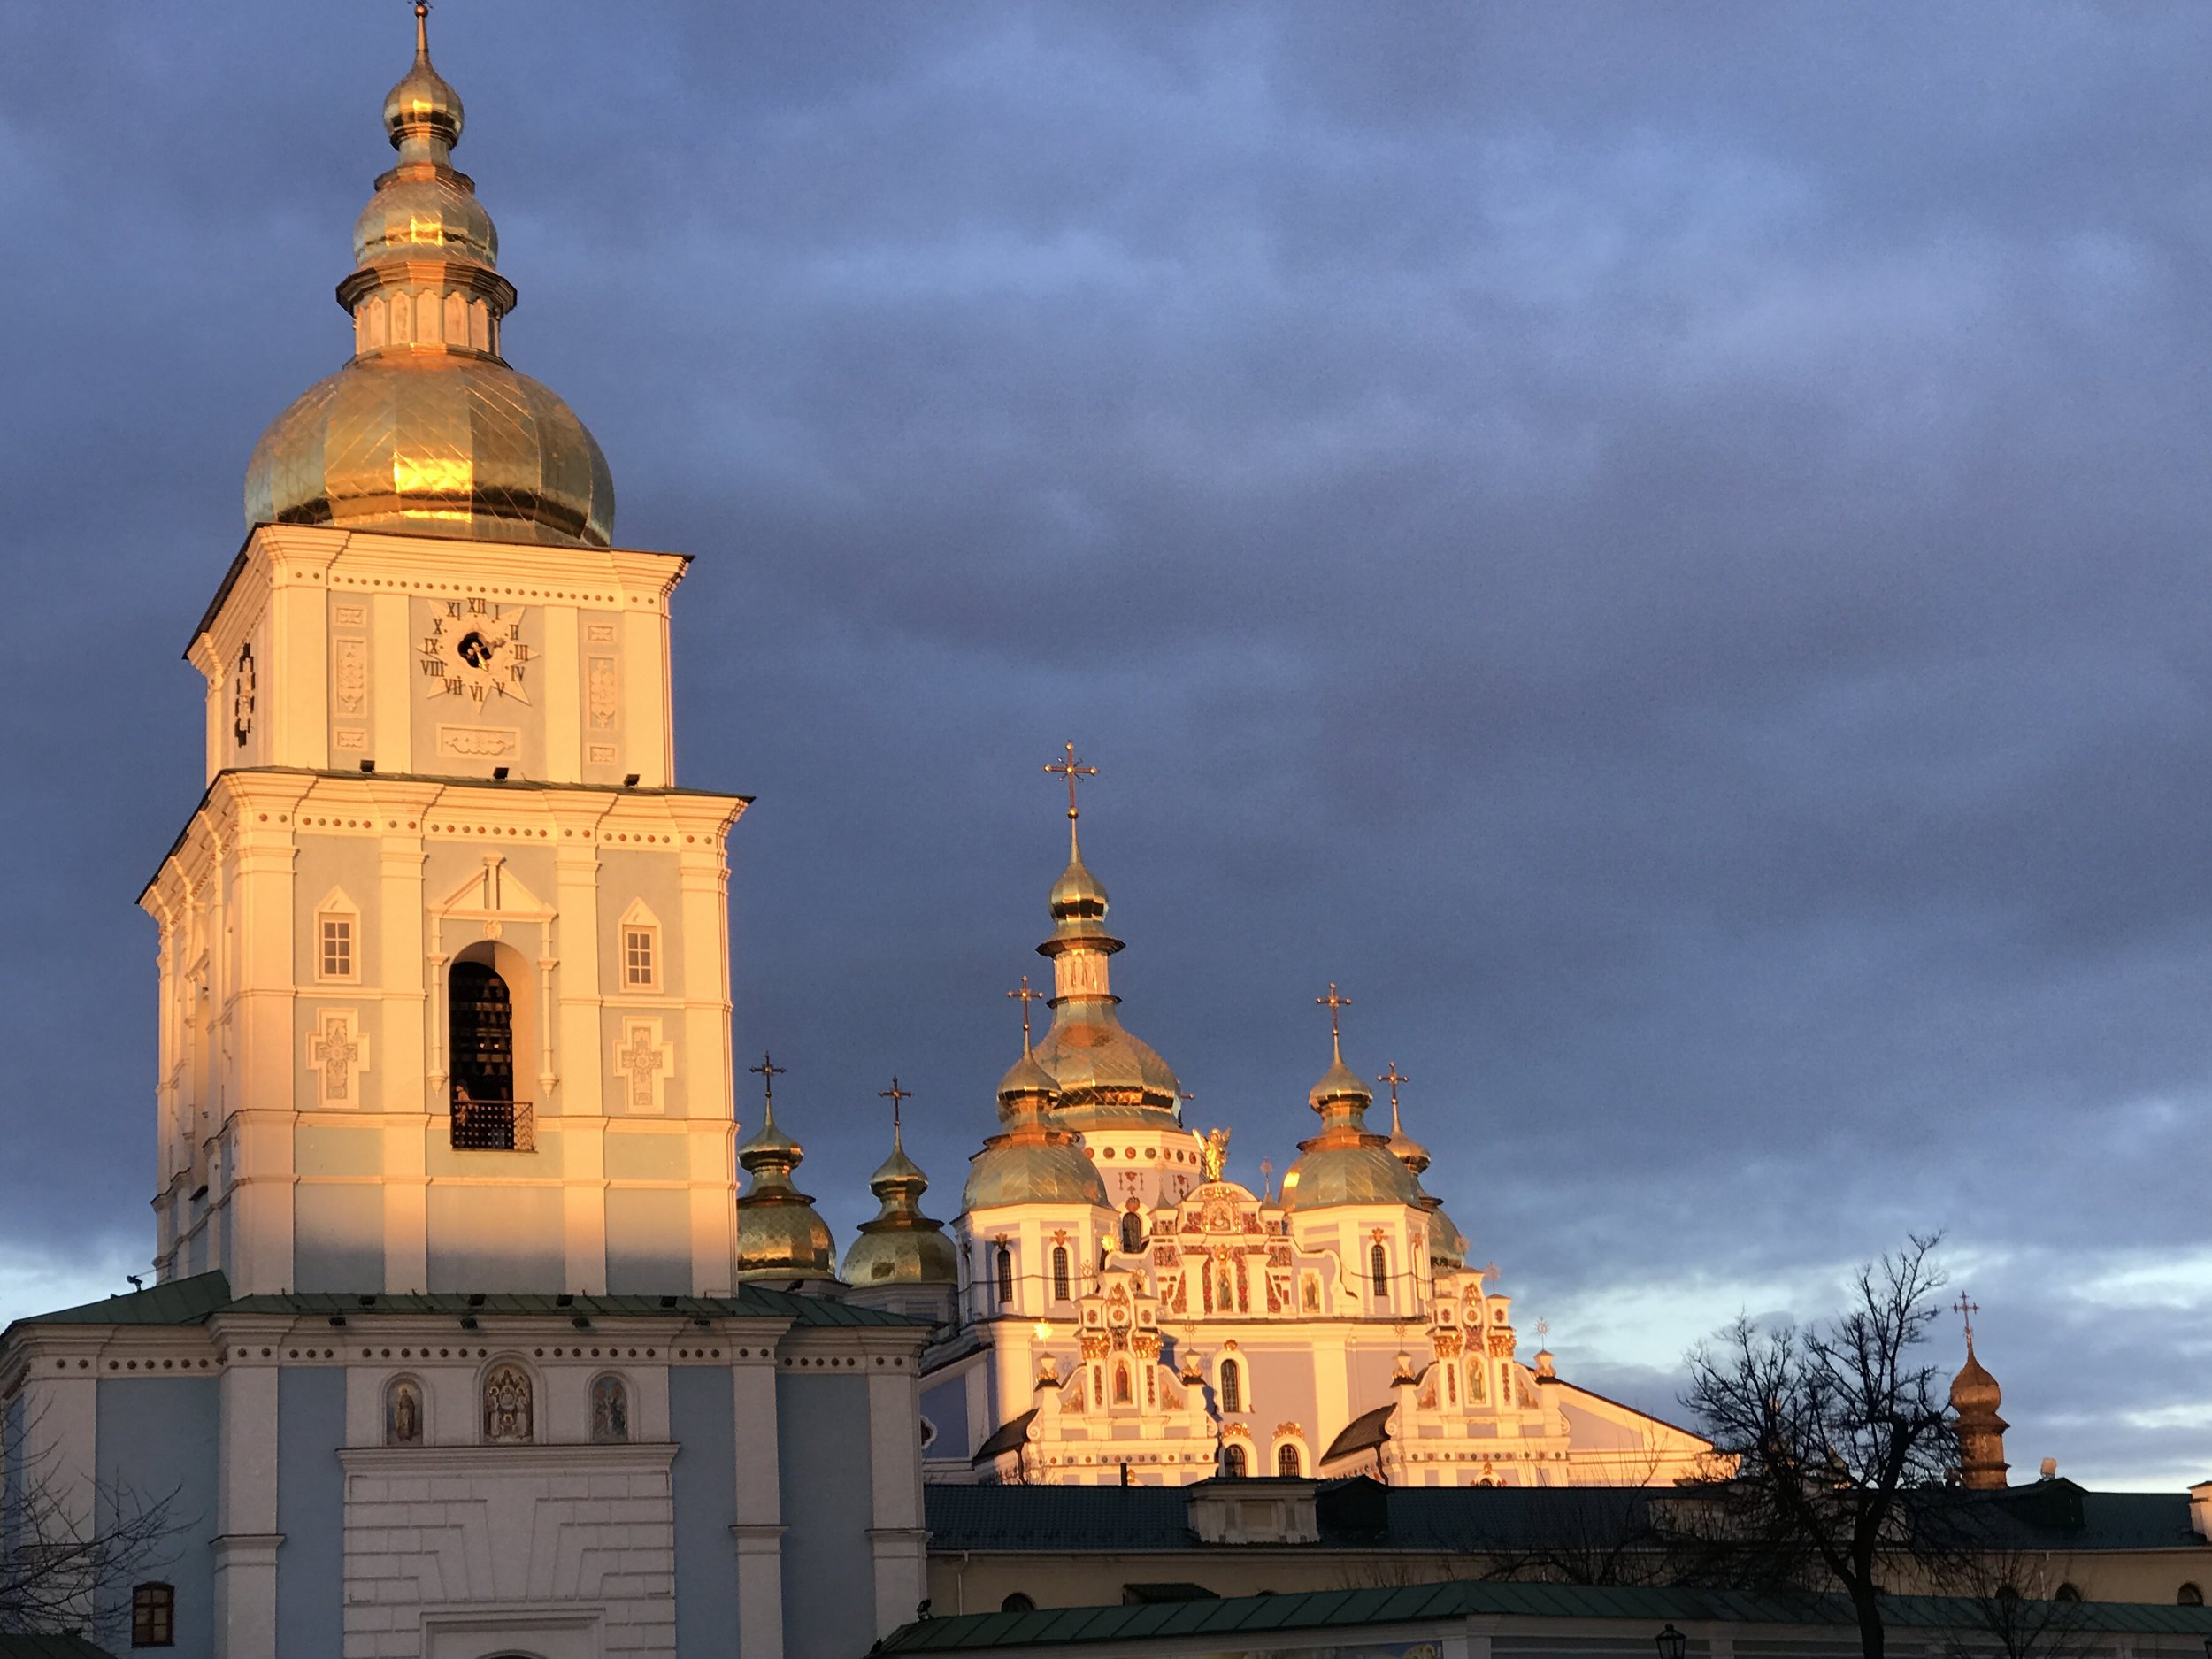 Beautiful domes of churches in Ukraine